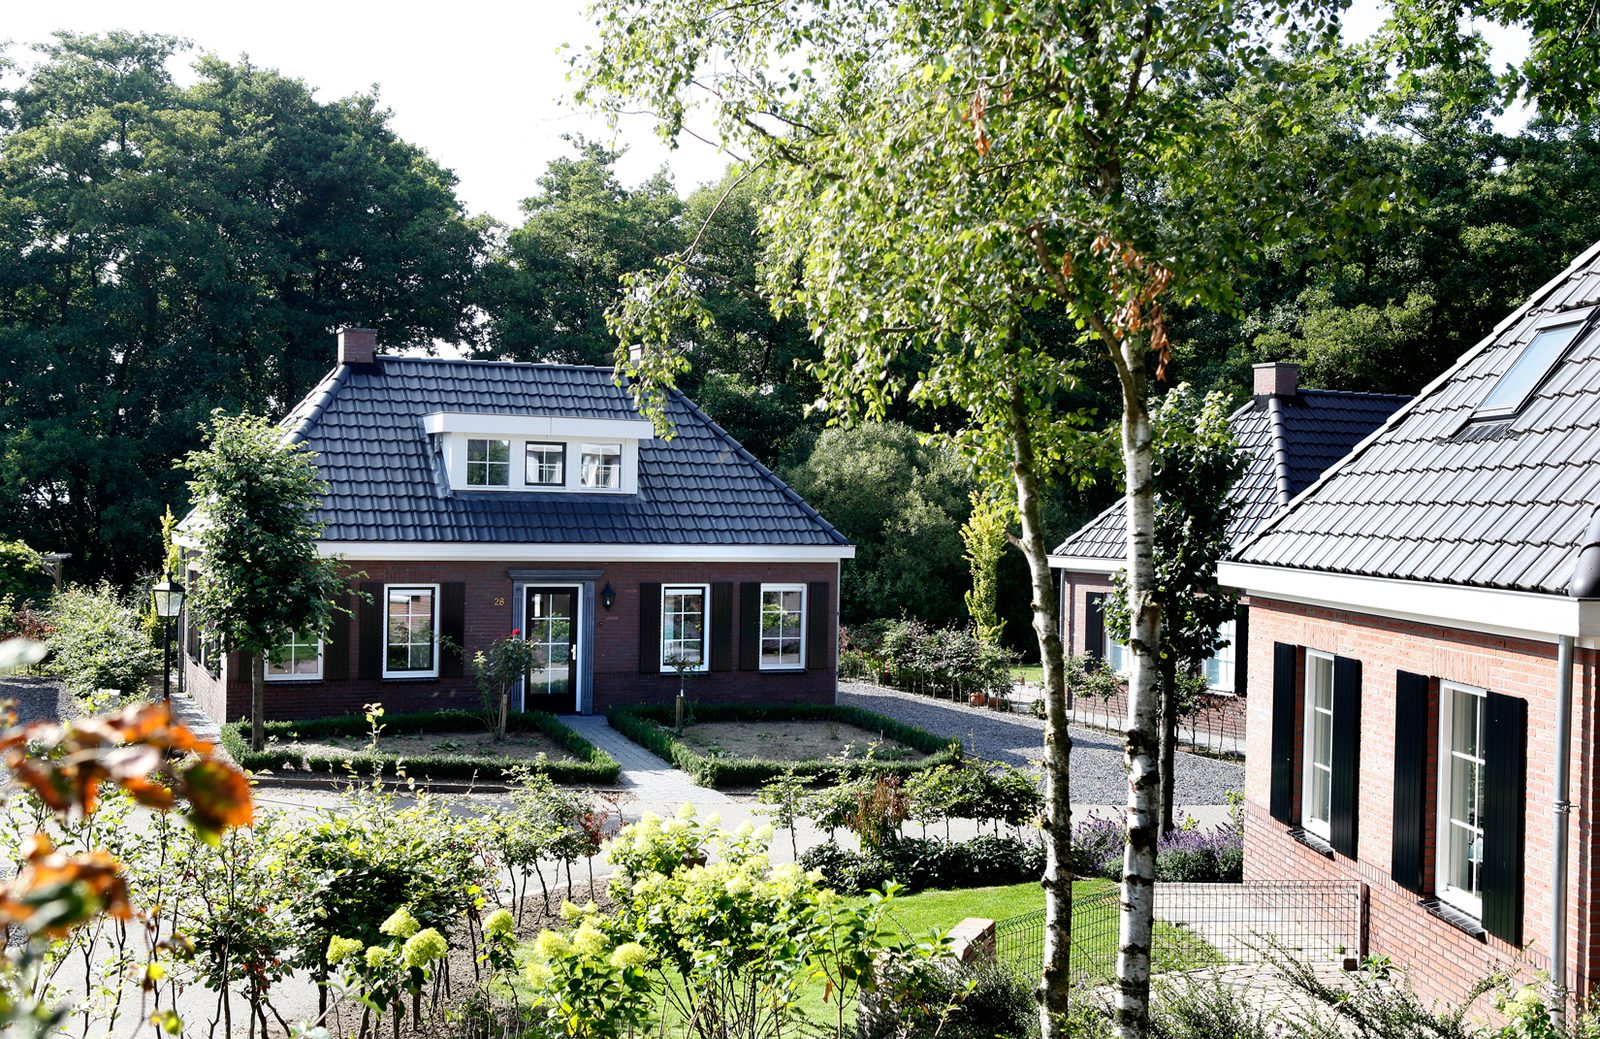 Rent a holiday home Ascension Day Veluwe